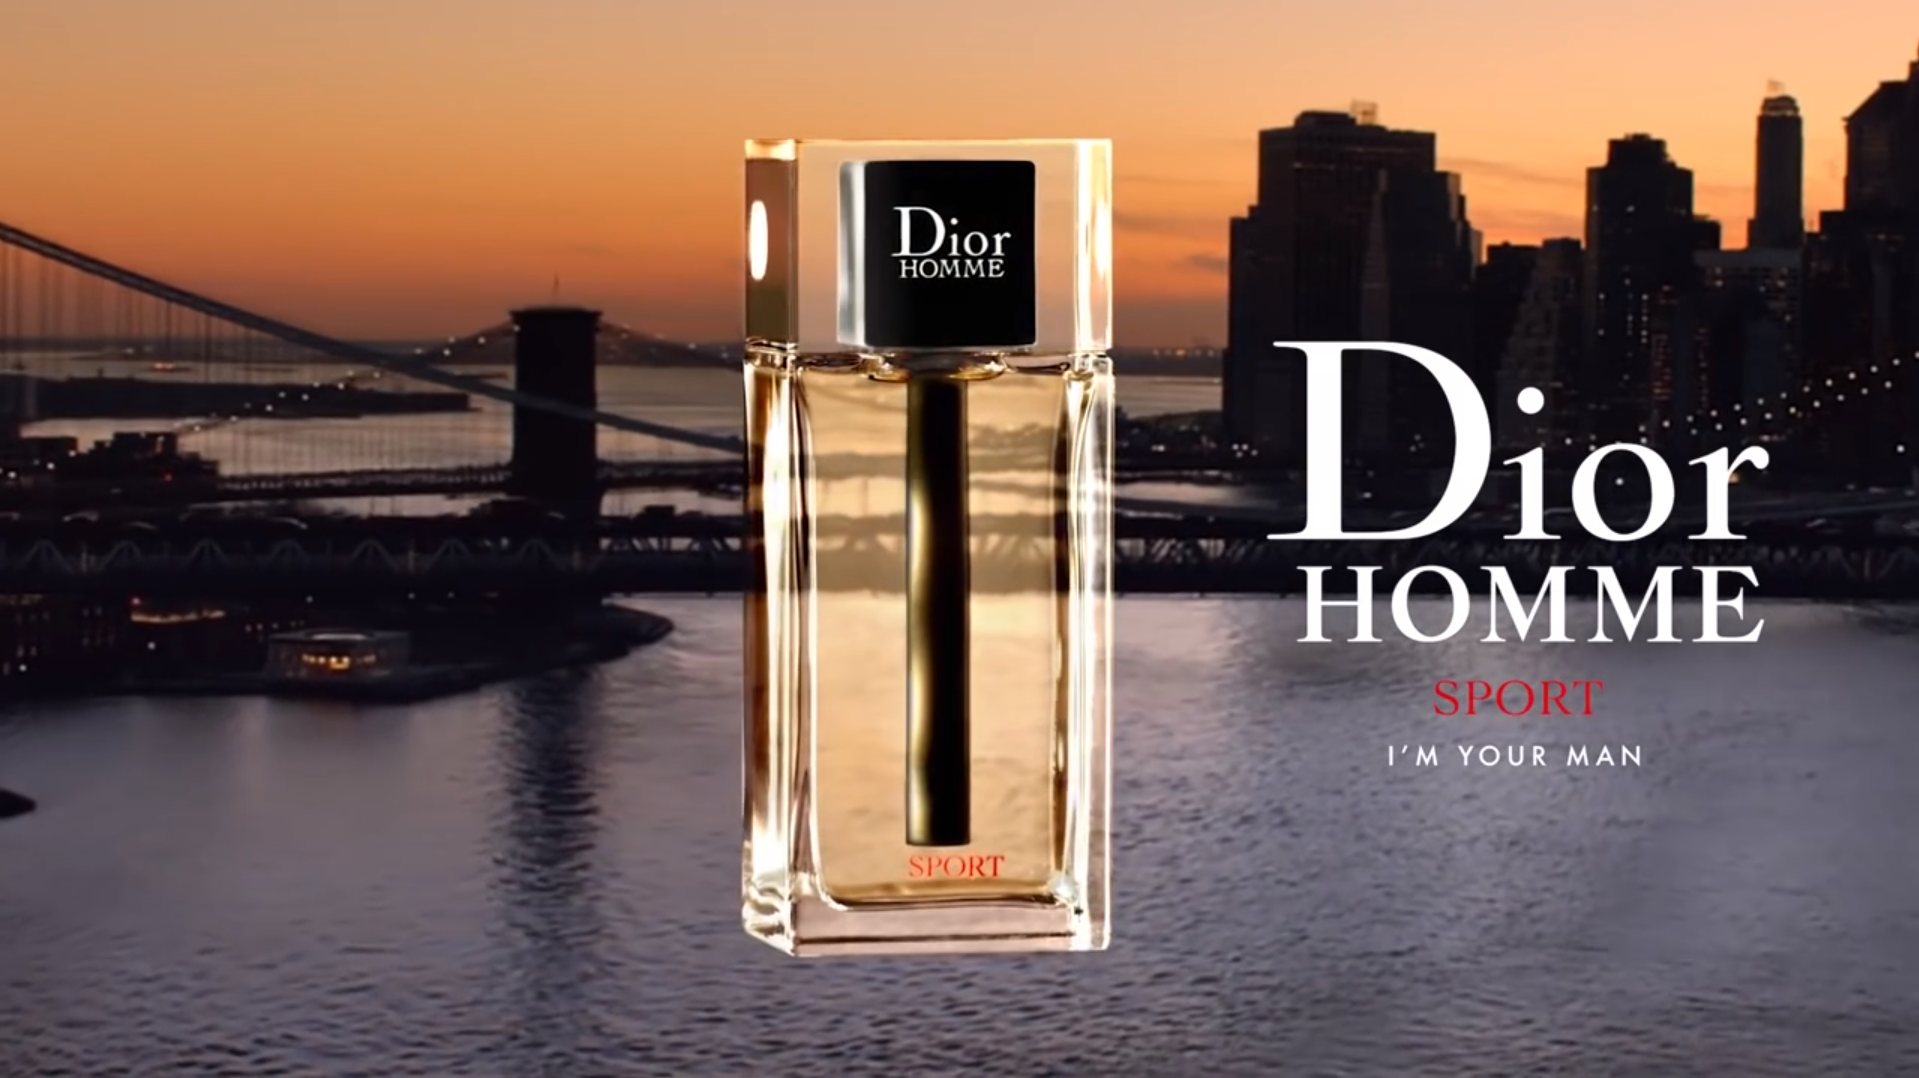 Dior Homme Sport - The new fragrance